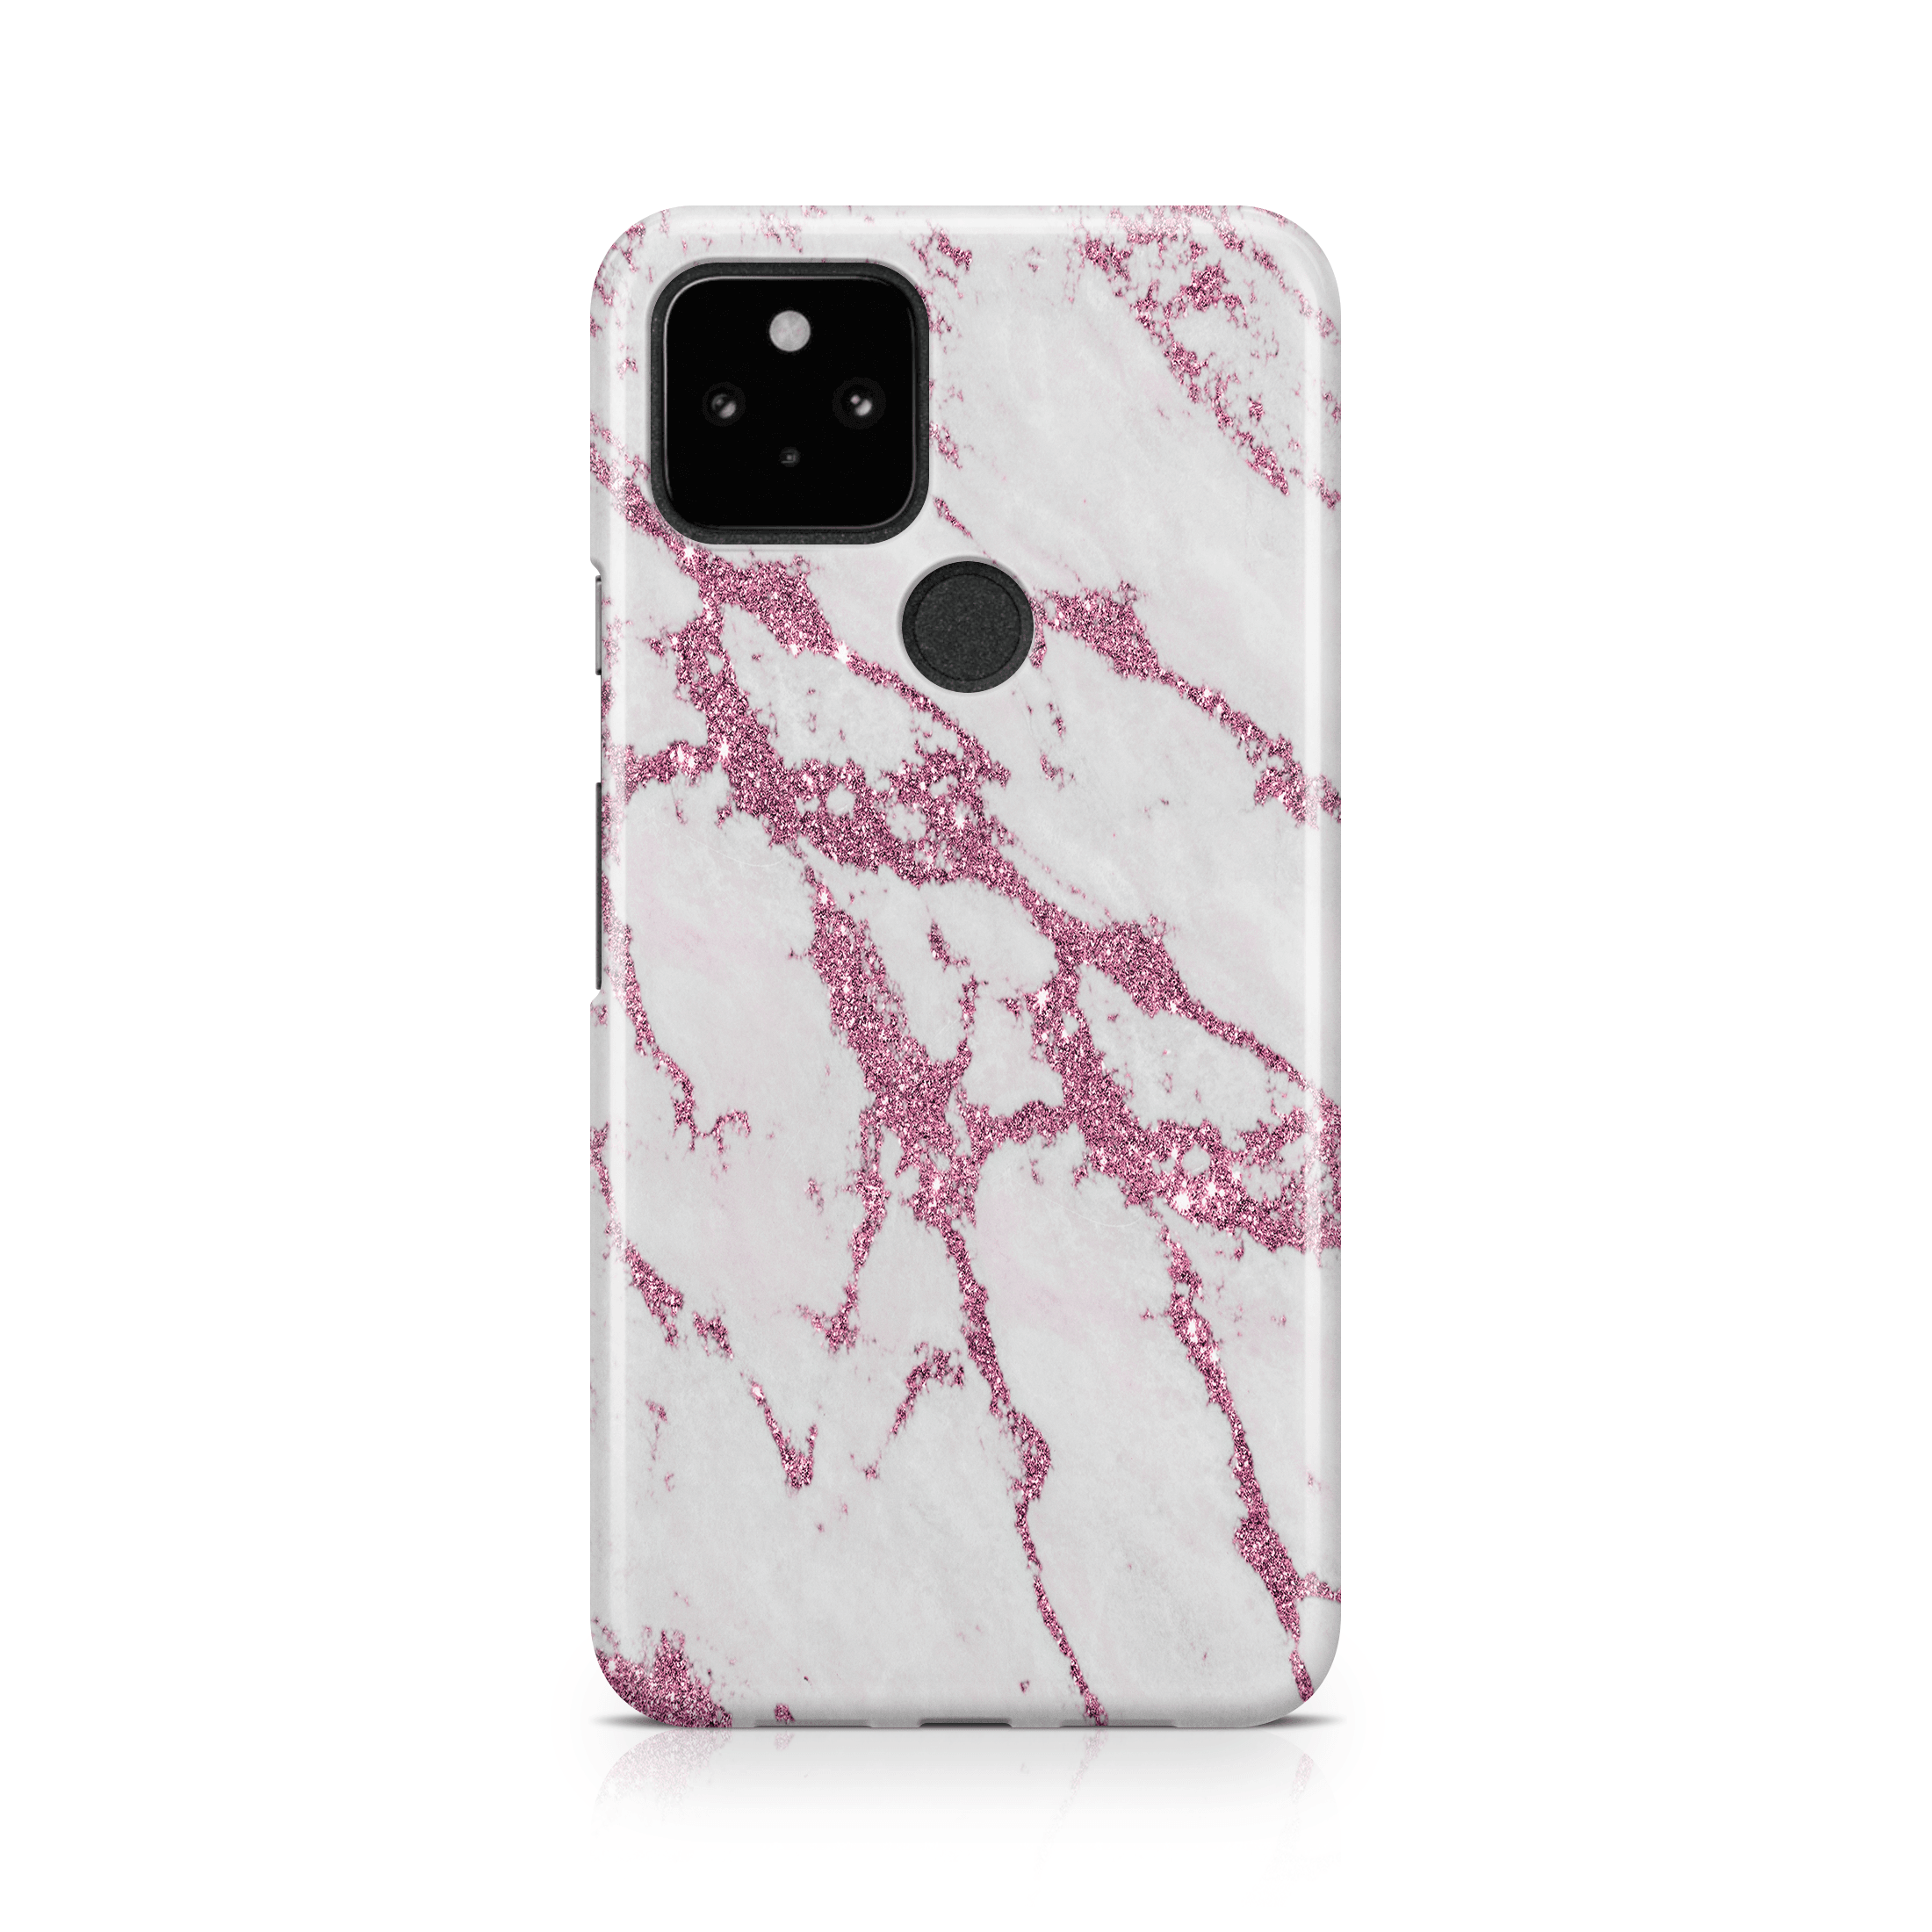 Rose Marble - Google phone case designs by CaseSwagger